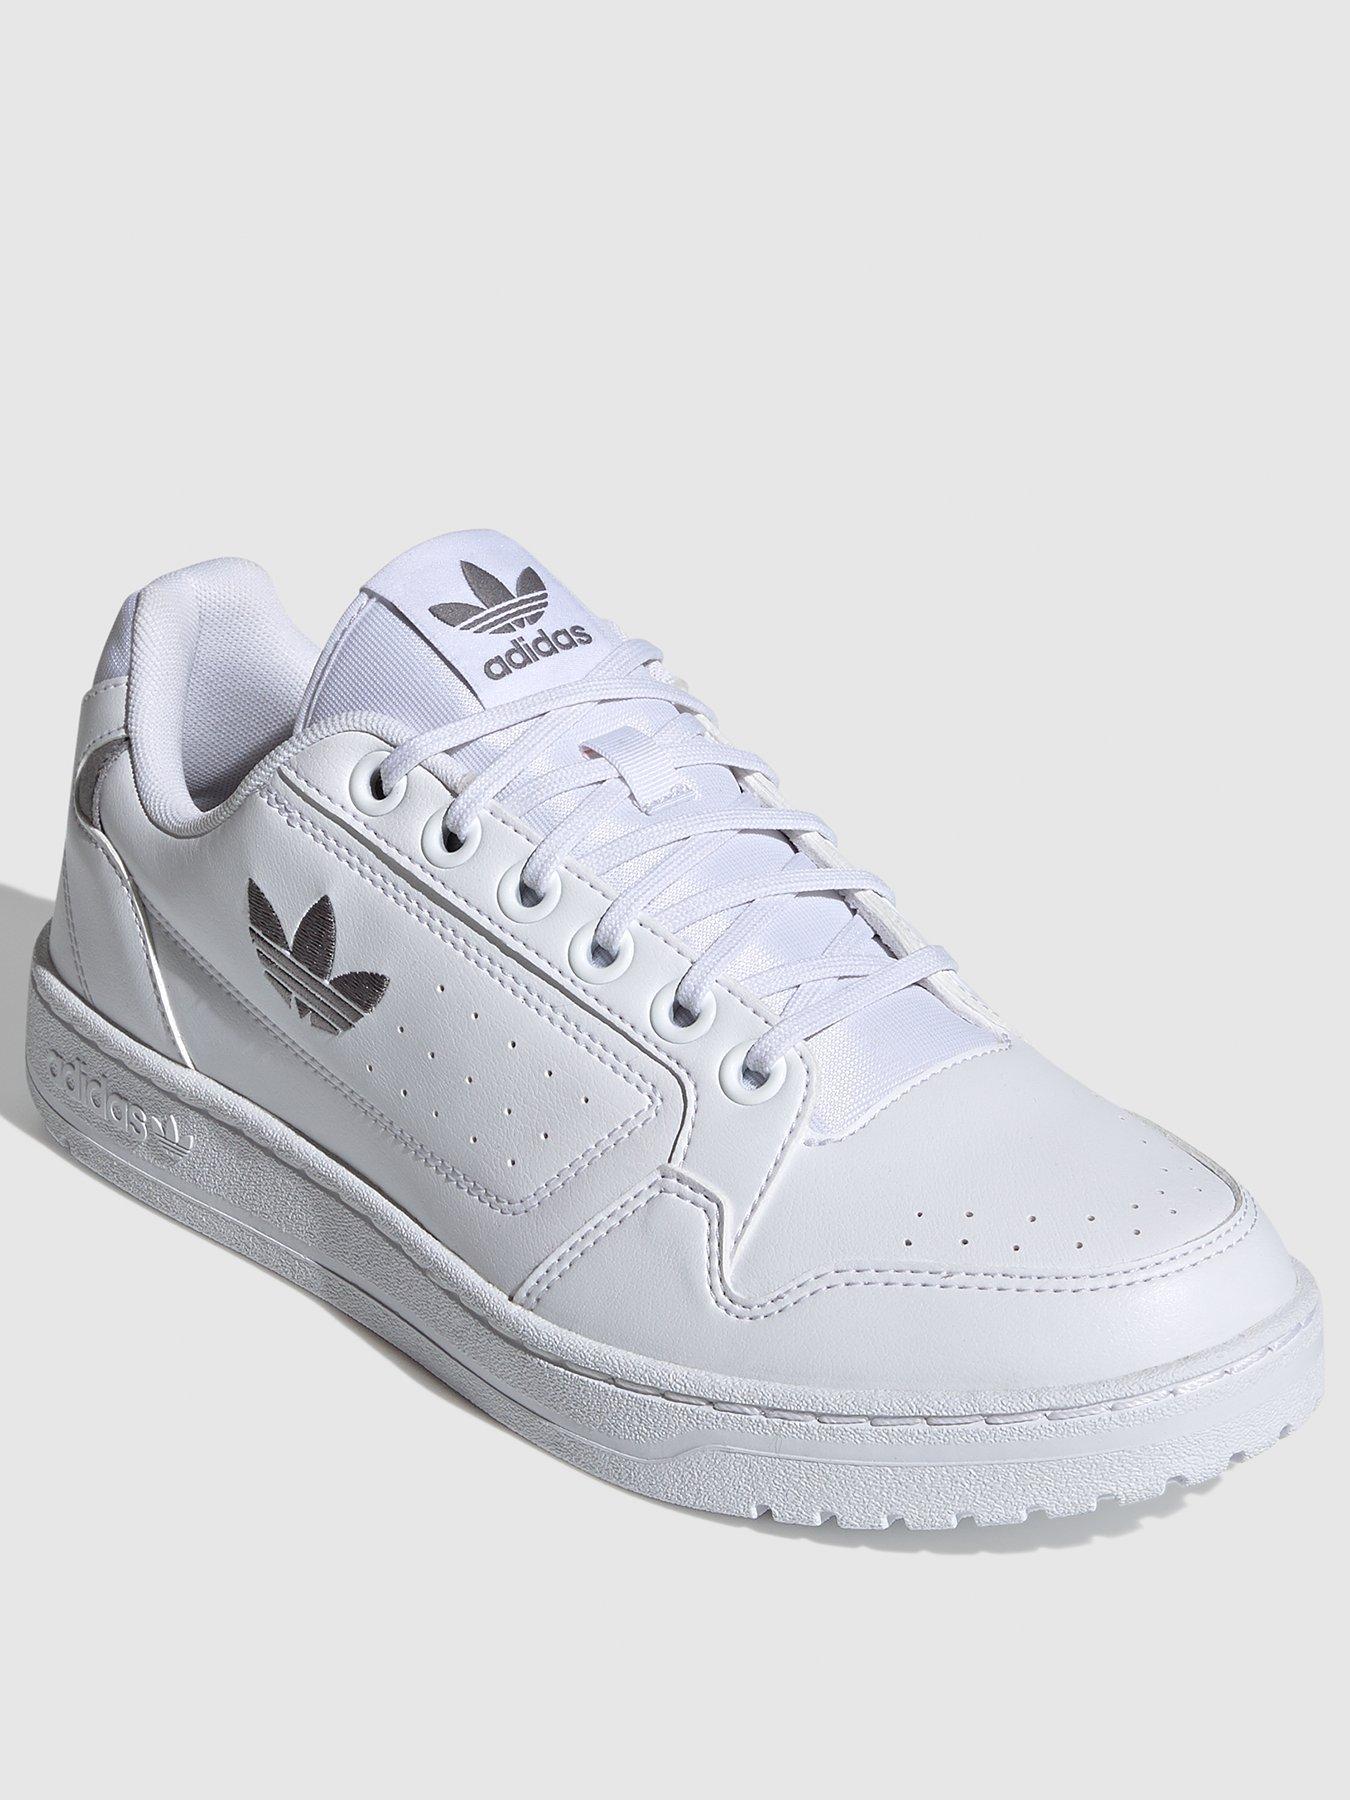 Adidas Trainers | Mens Adidas Trainers 